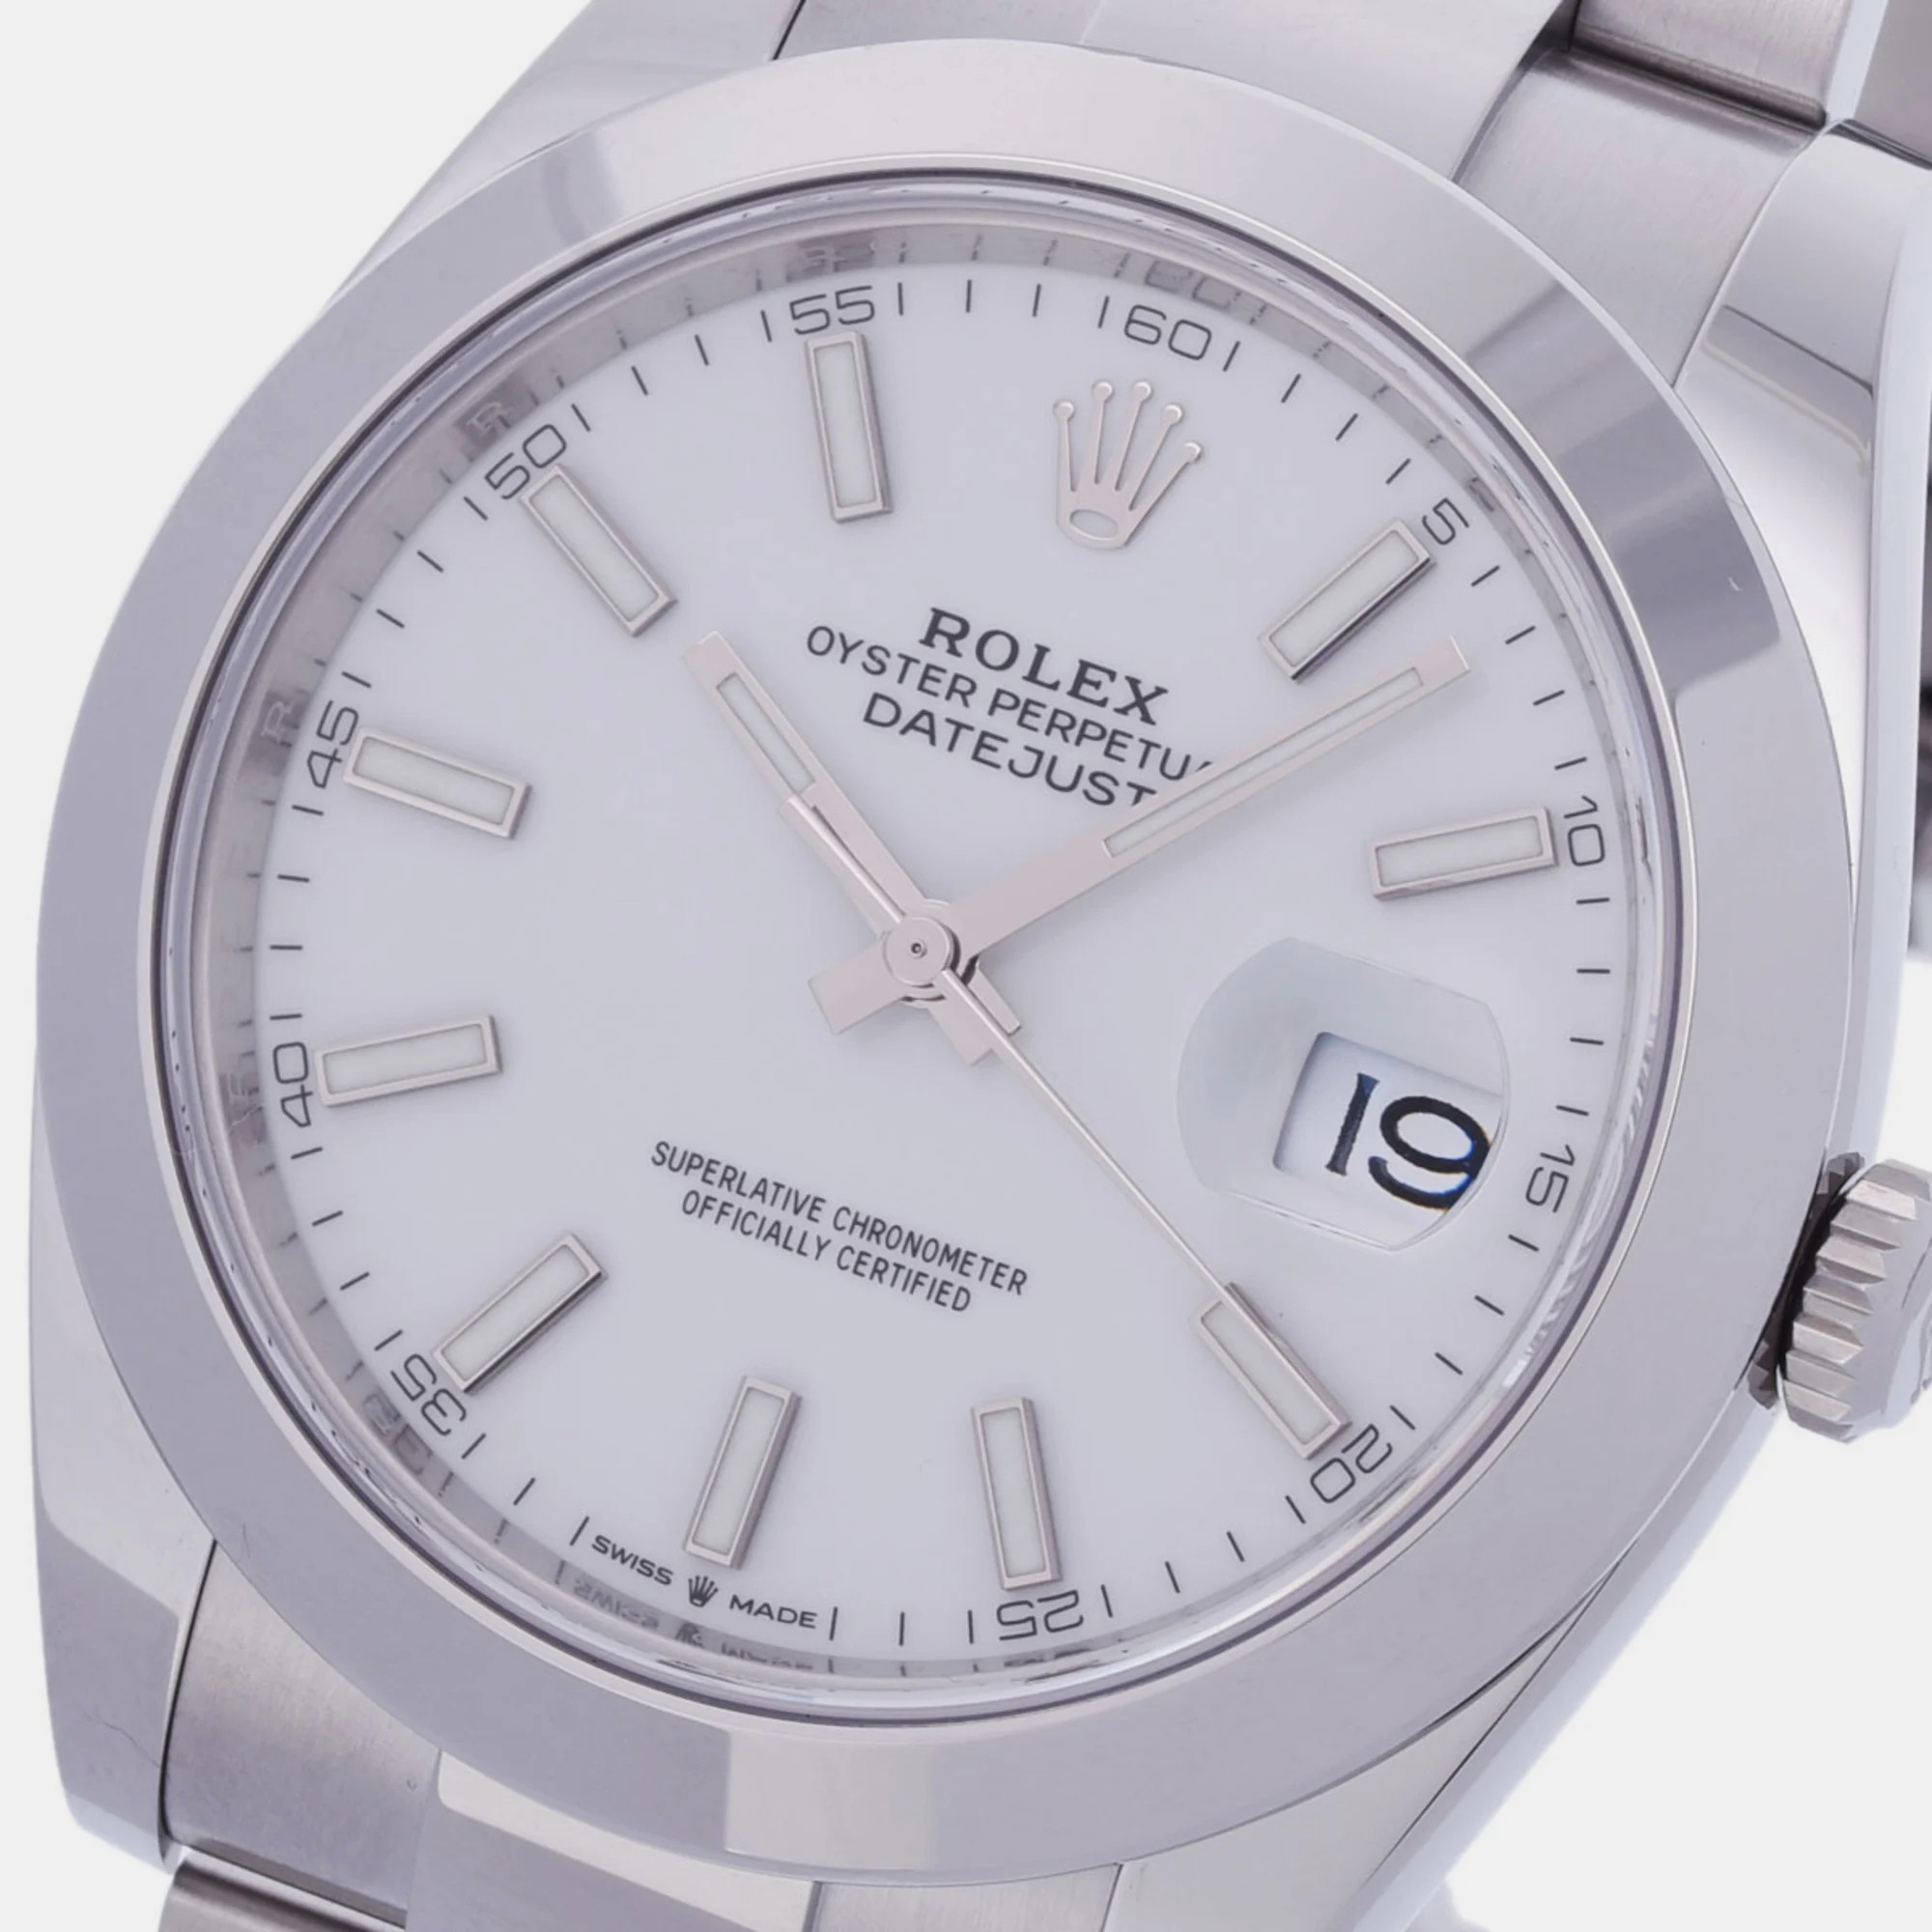 Rolex White Stainless Steel Datejust 126300 Automatic Men's Wristwatch 41 Mm